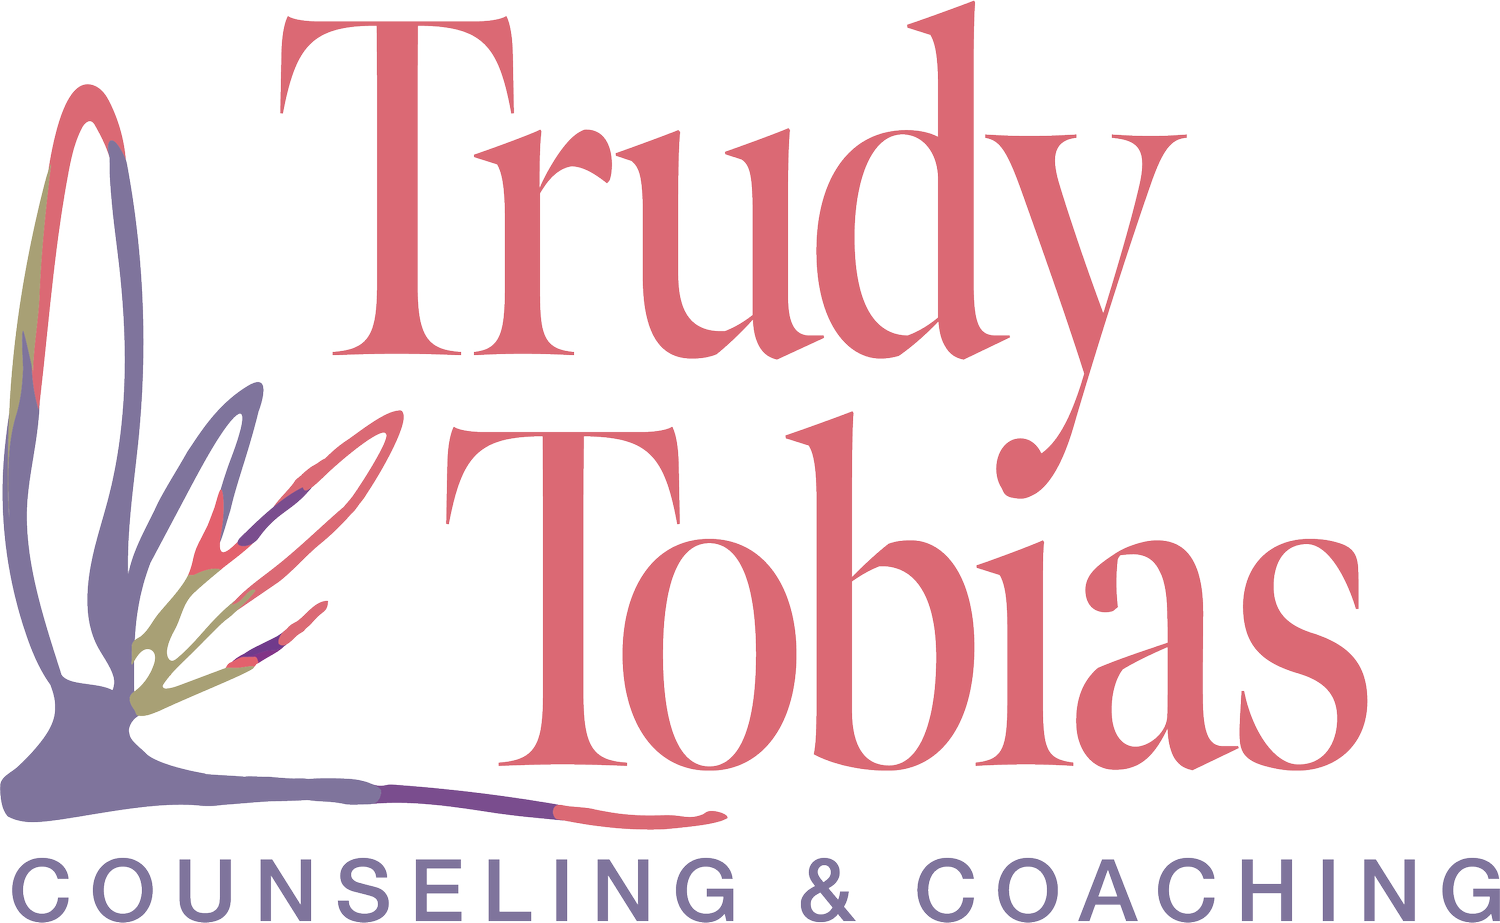 Trudy Tobias Counselor &amp; Coach for Personal Growth